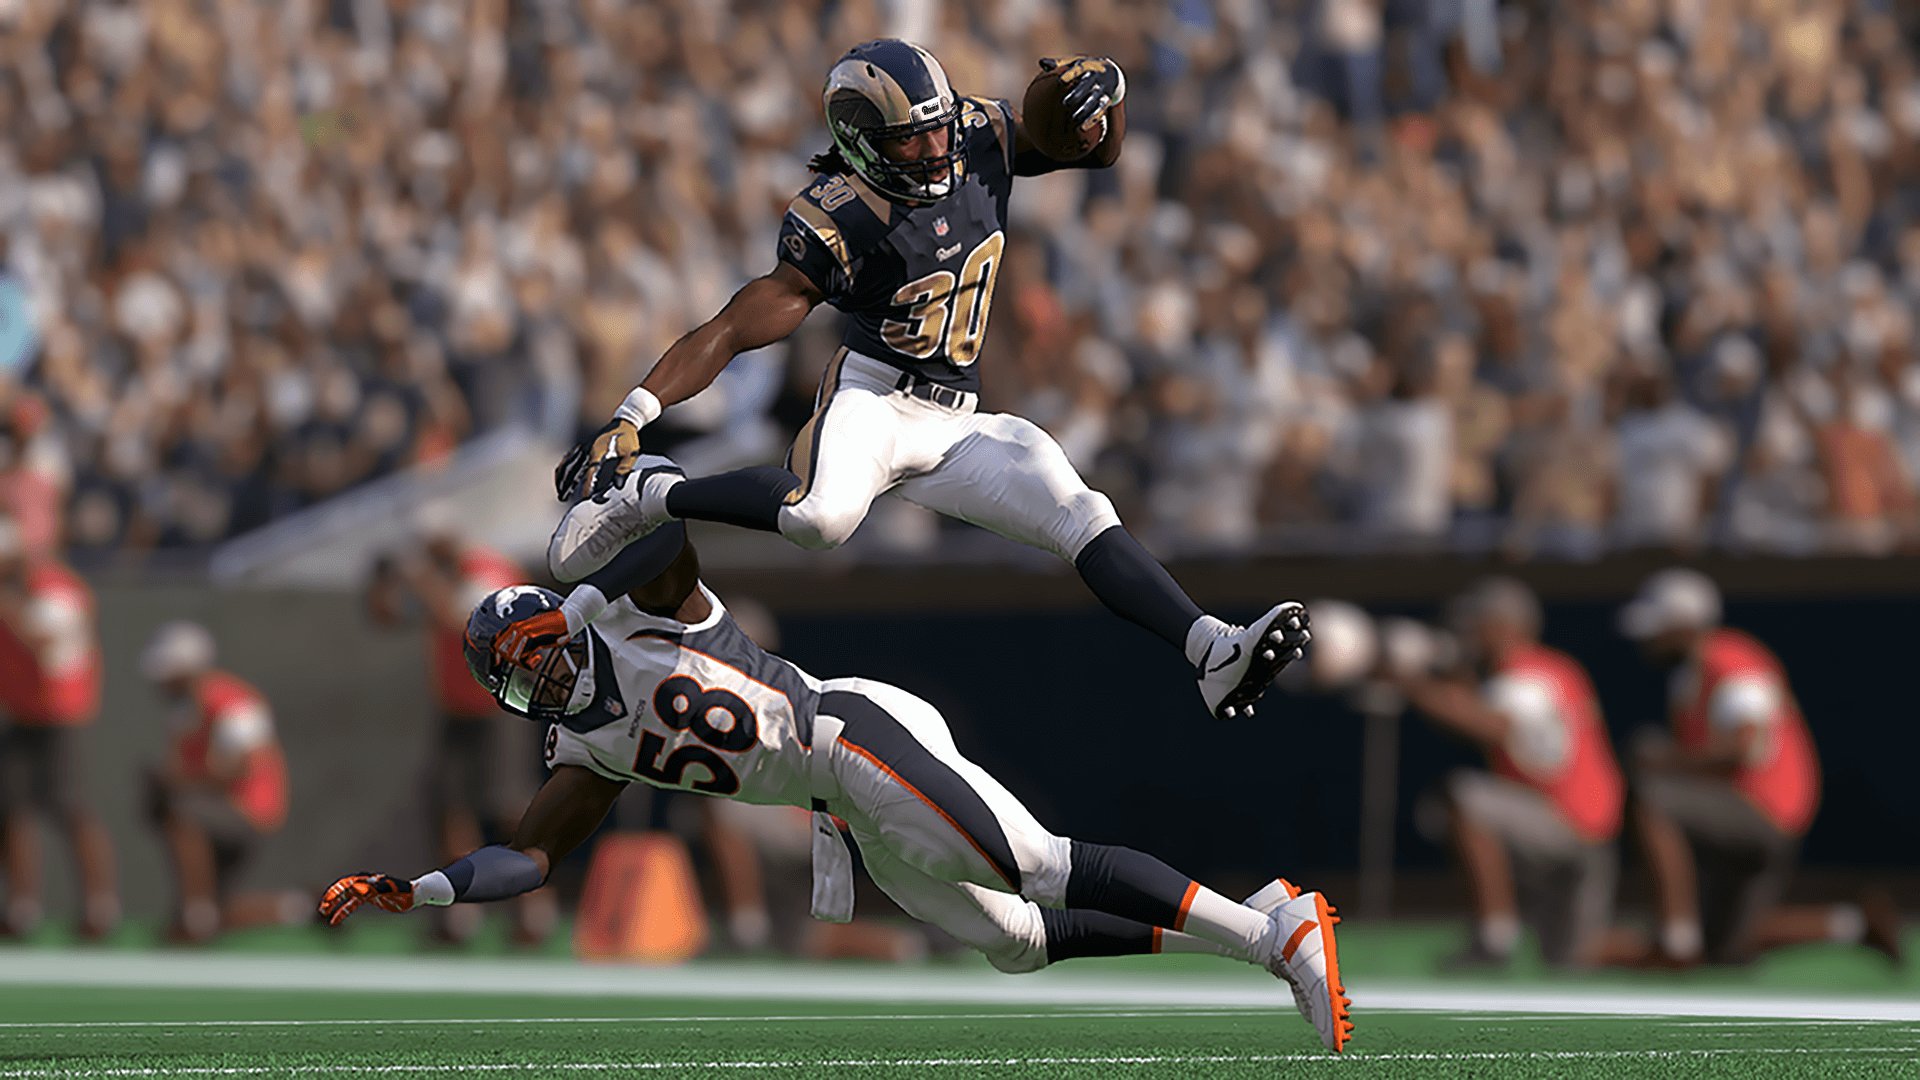 Madden football for pc free download